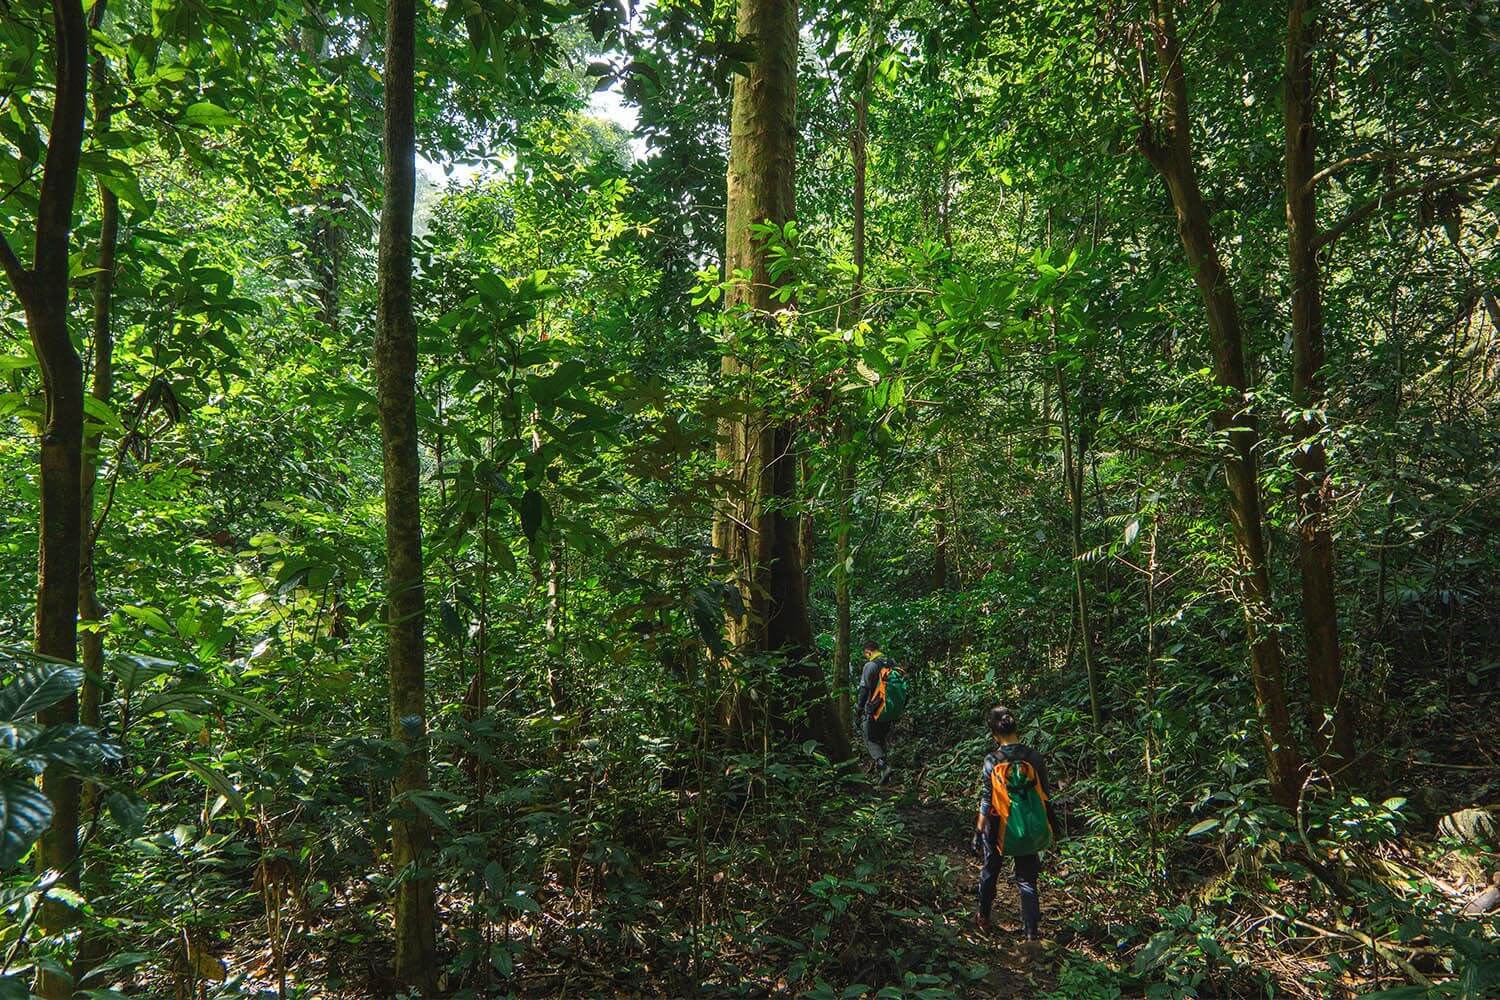 Trek under the canopy of ancient trees